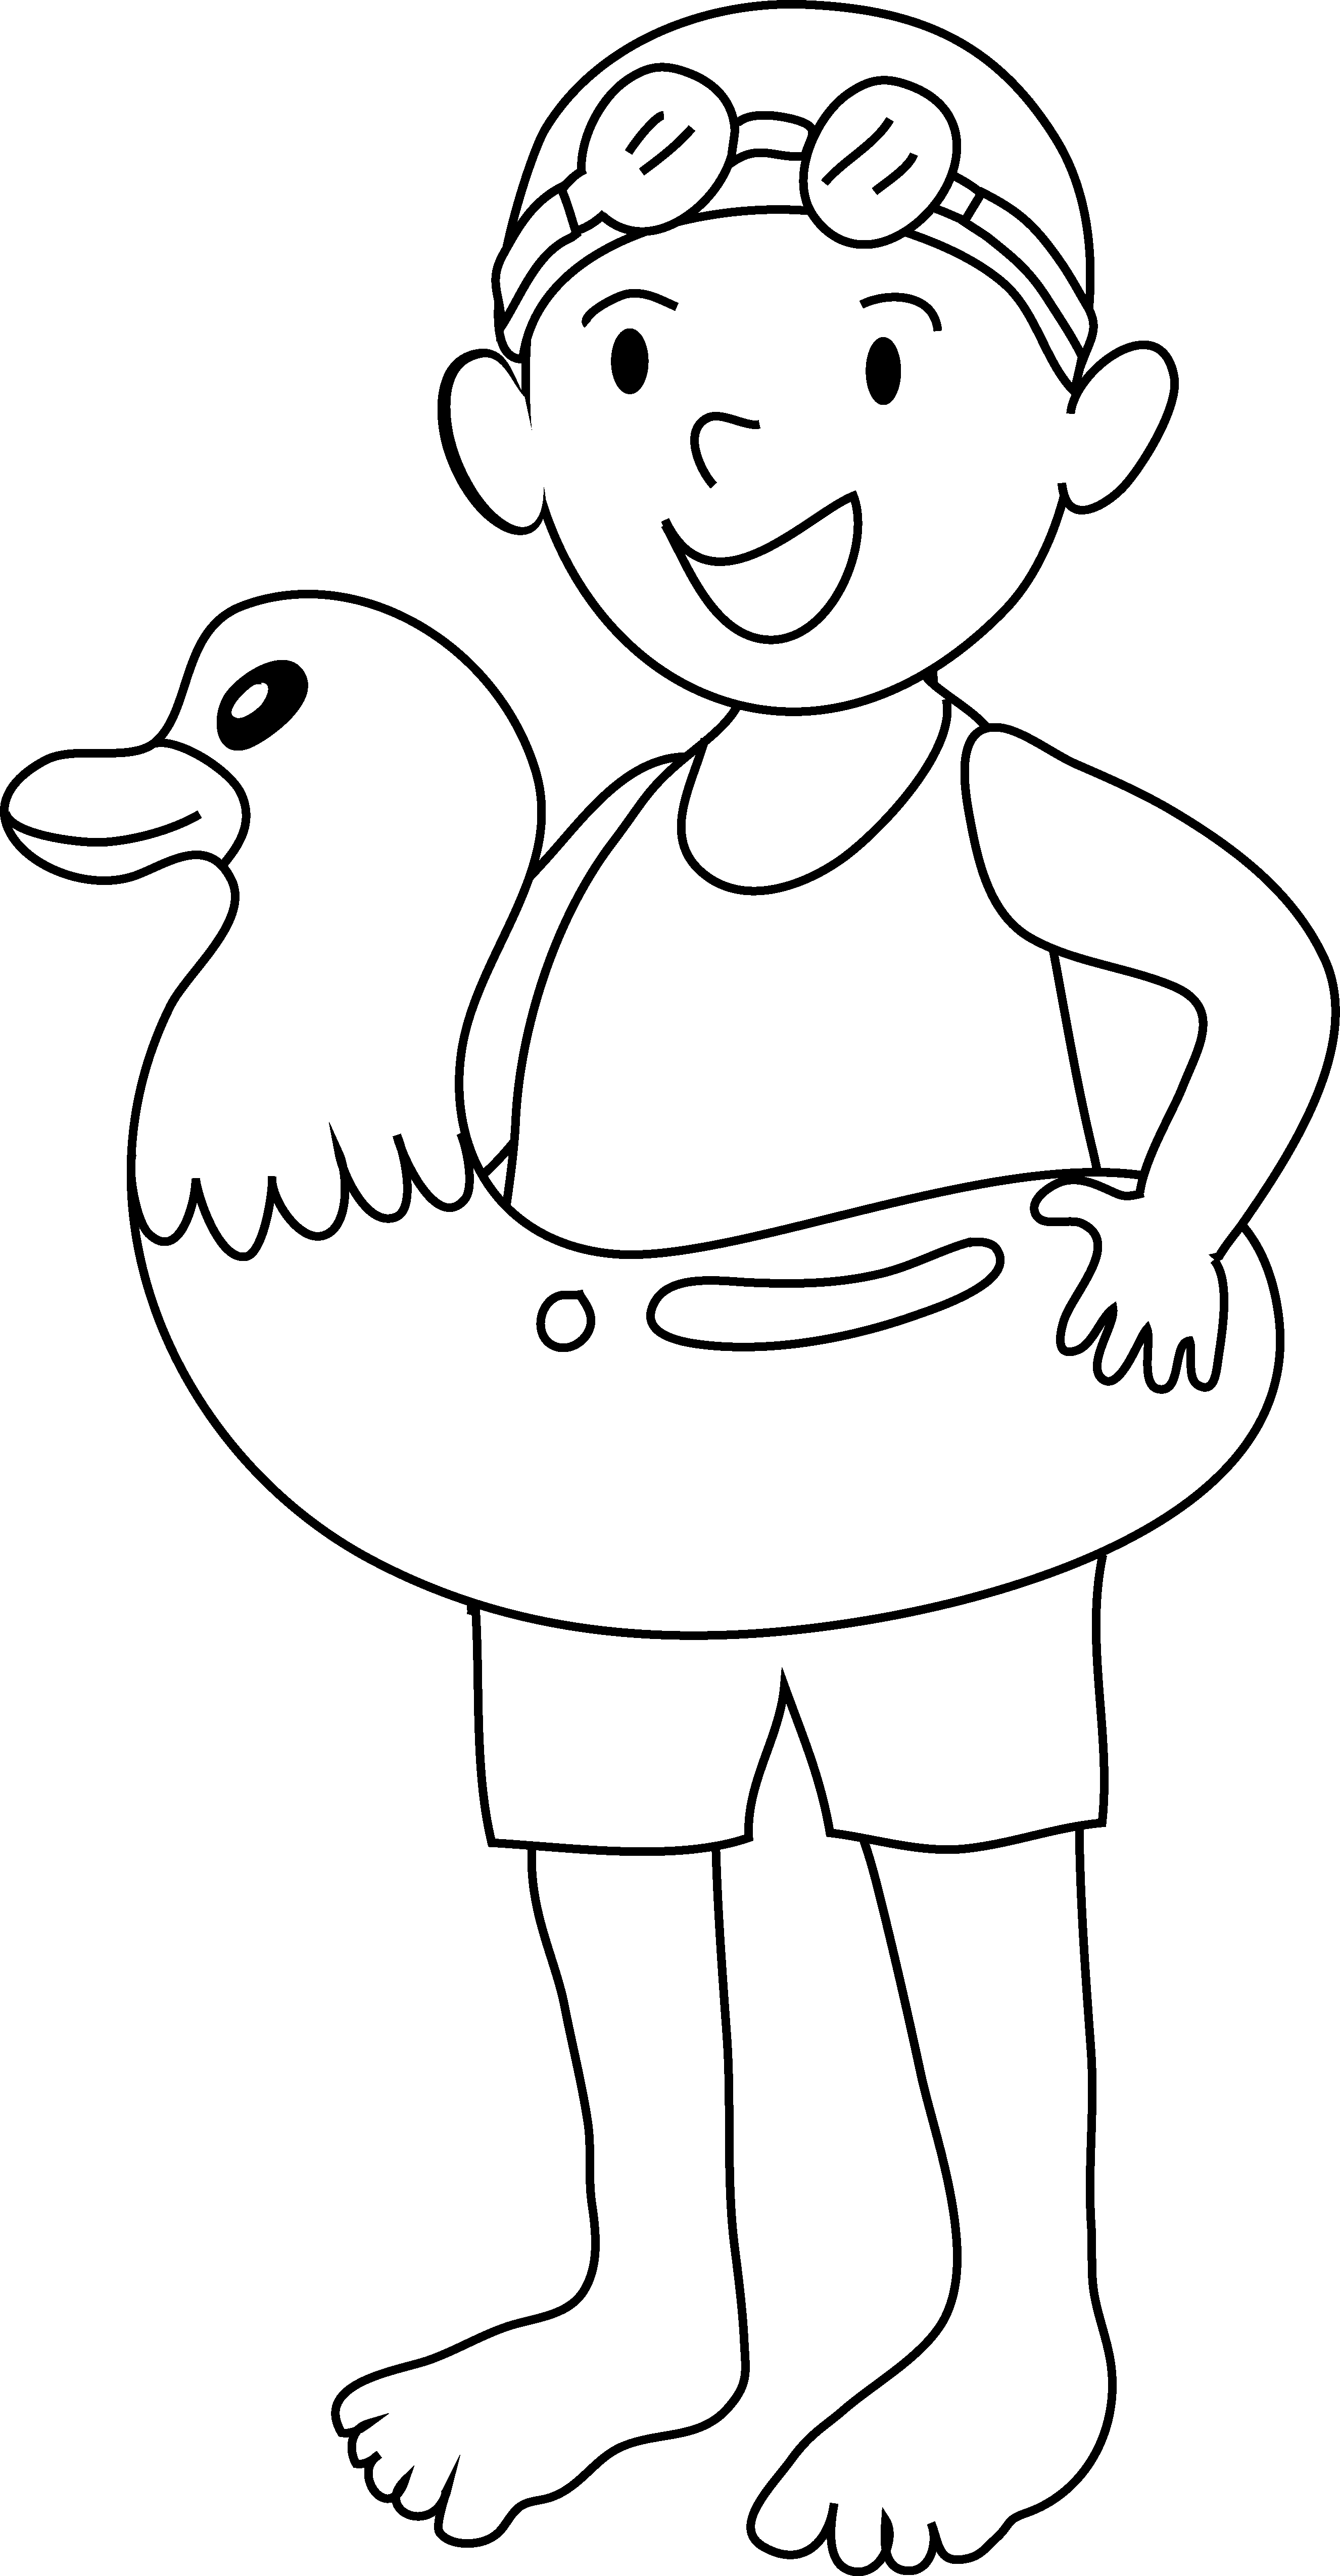 Coloring page of kid. Swimmer clipart bathing suit